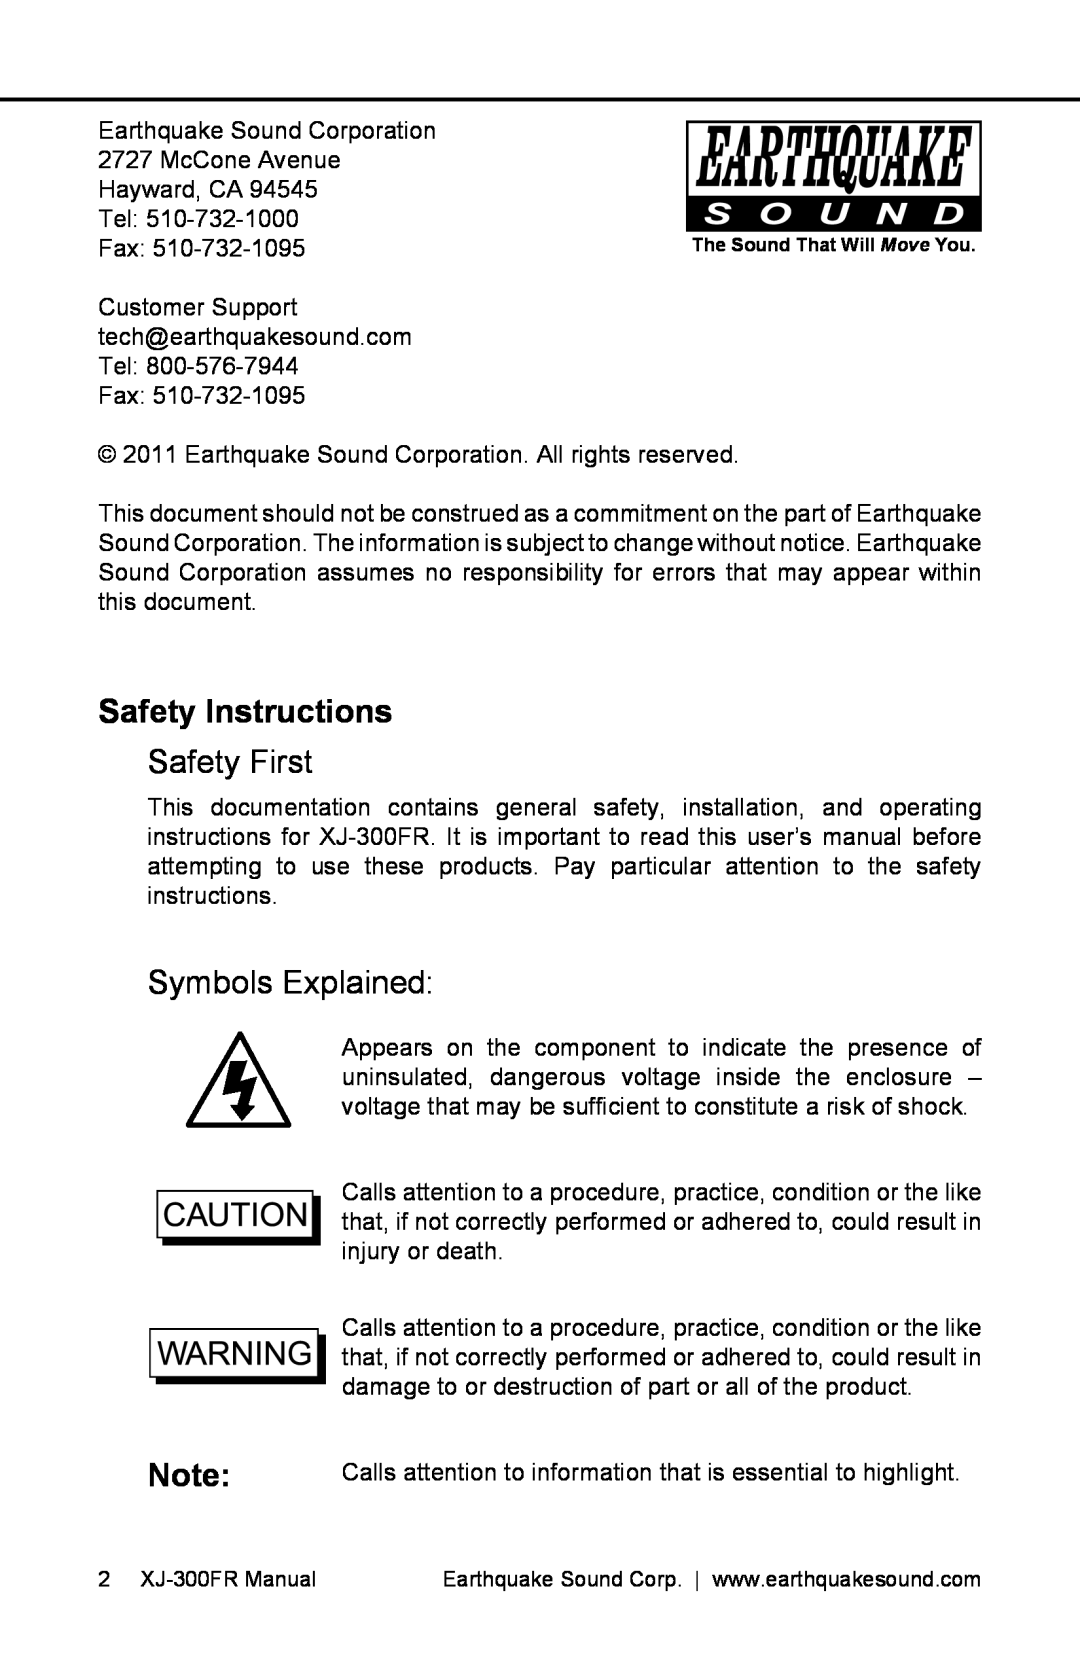 Earthquake Sound XJ-300 FR user manual Safety Instructions, Safety First, Symbols Explained 